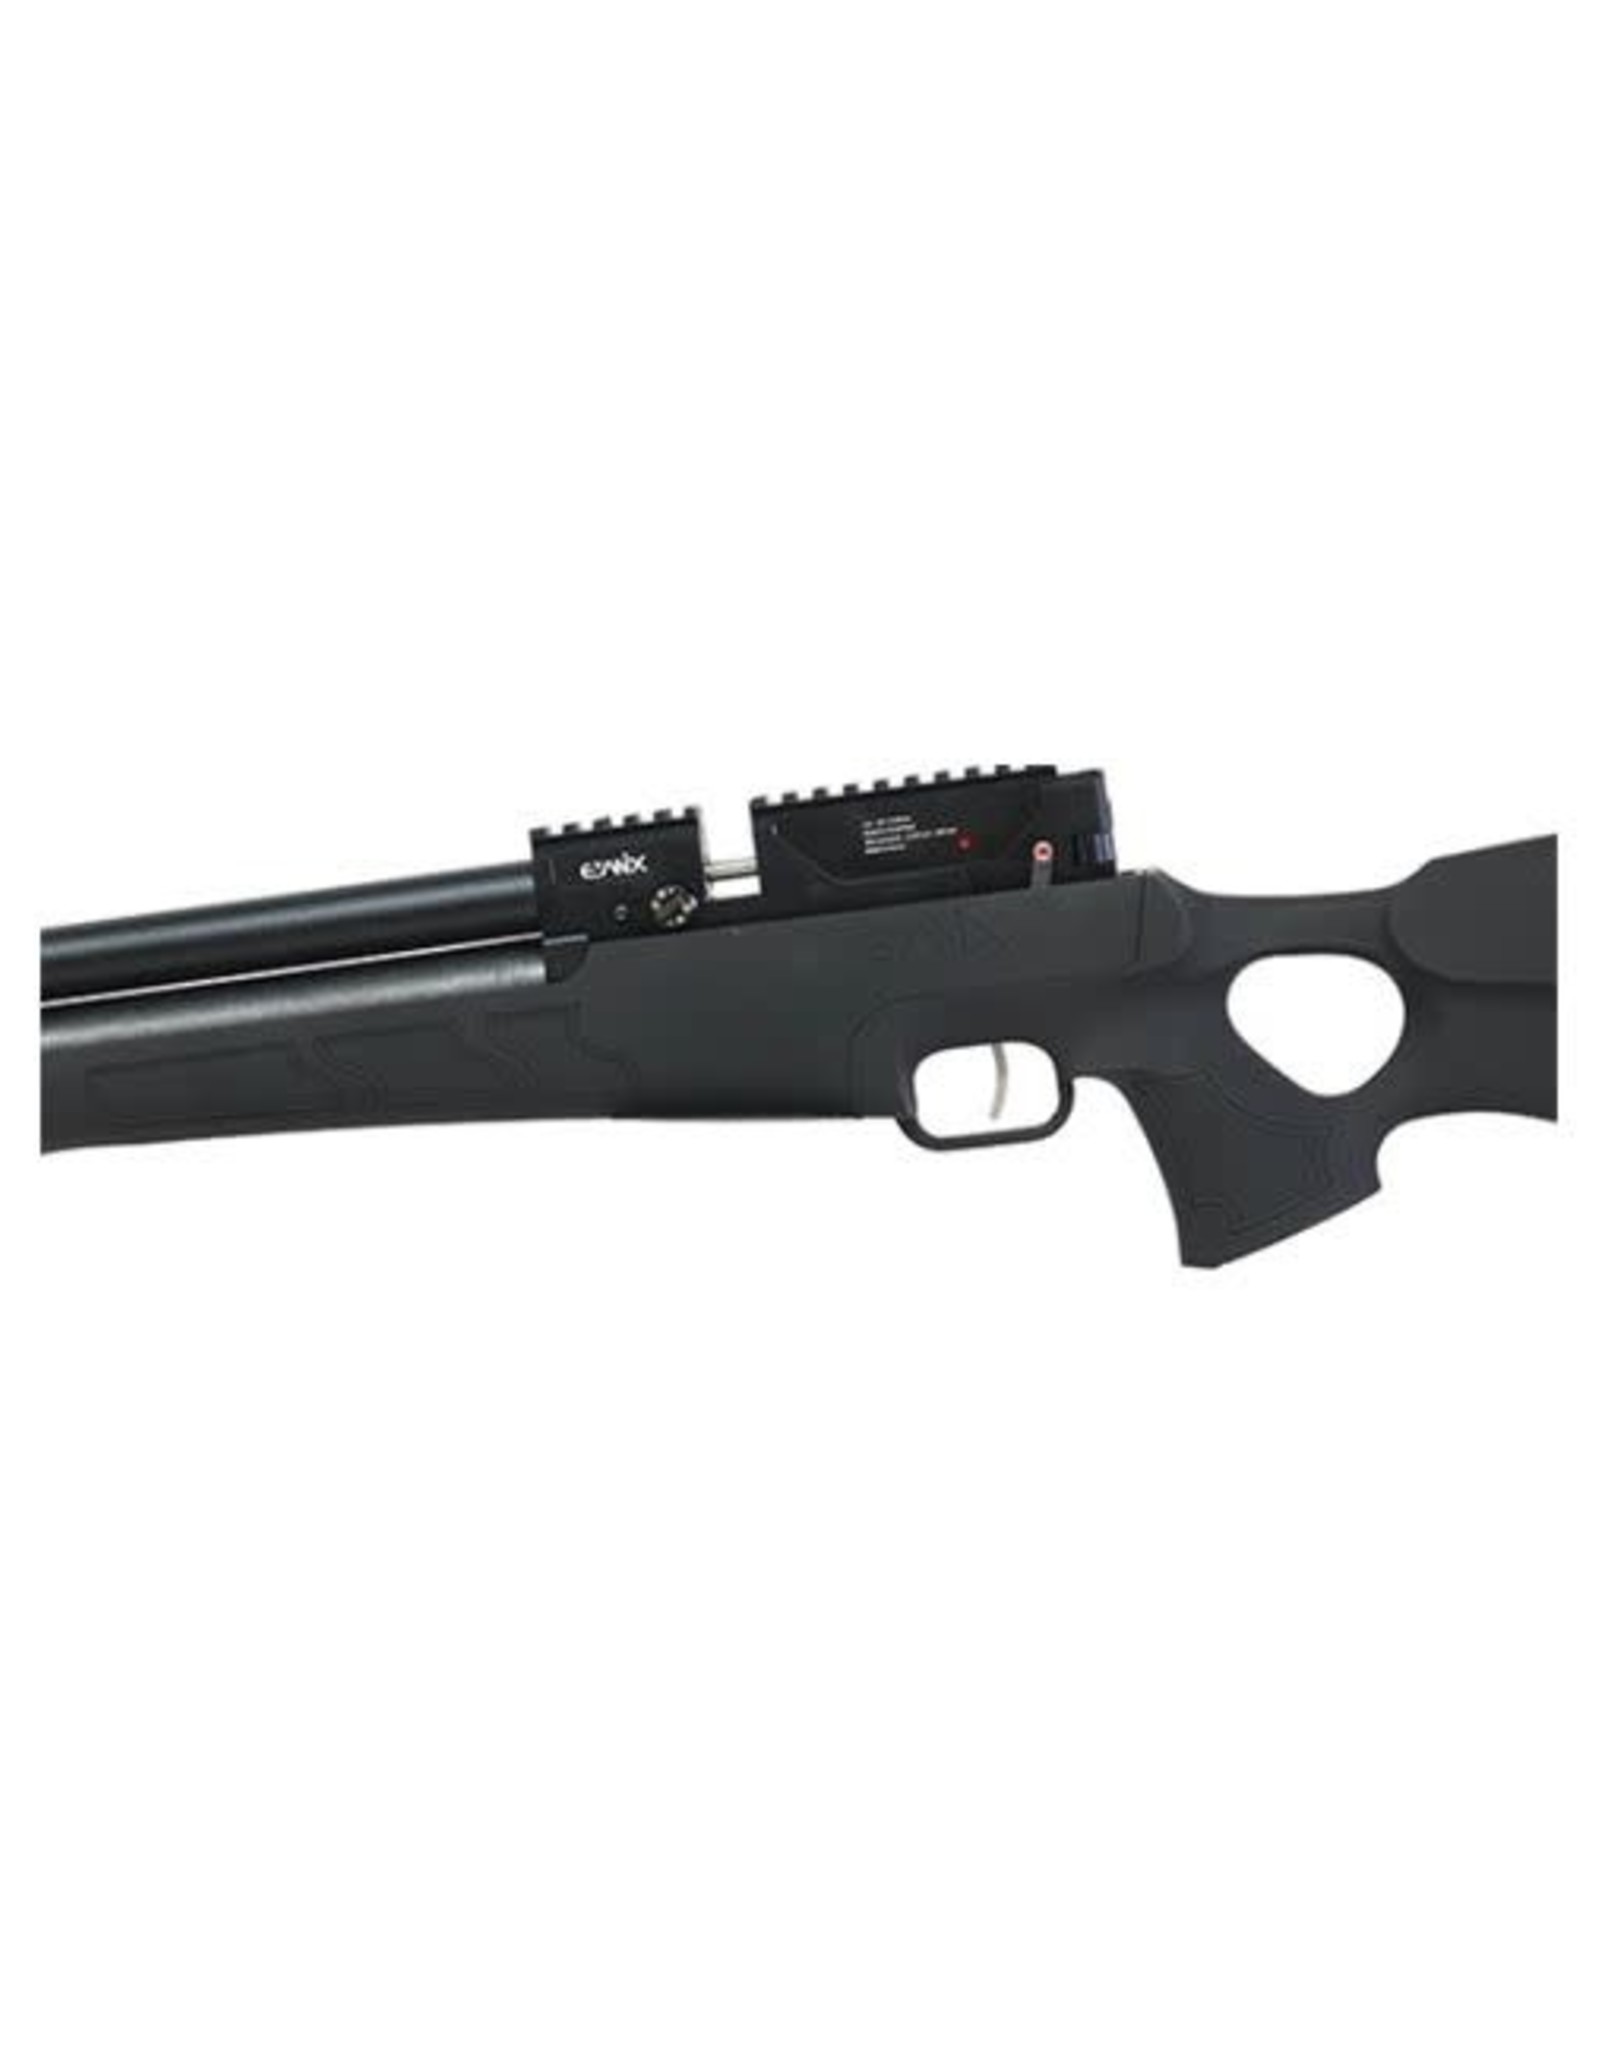 Evanix Evanix Air Speed Semi-Automatic PCP Air Rifle with Synthetic Stock .25 Caliber (6.35mm) - Two 8 Round Magazines